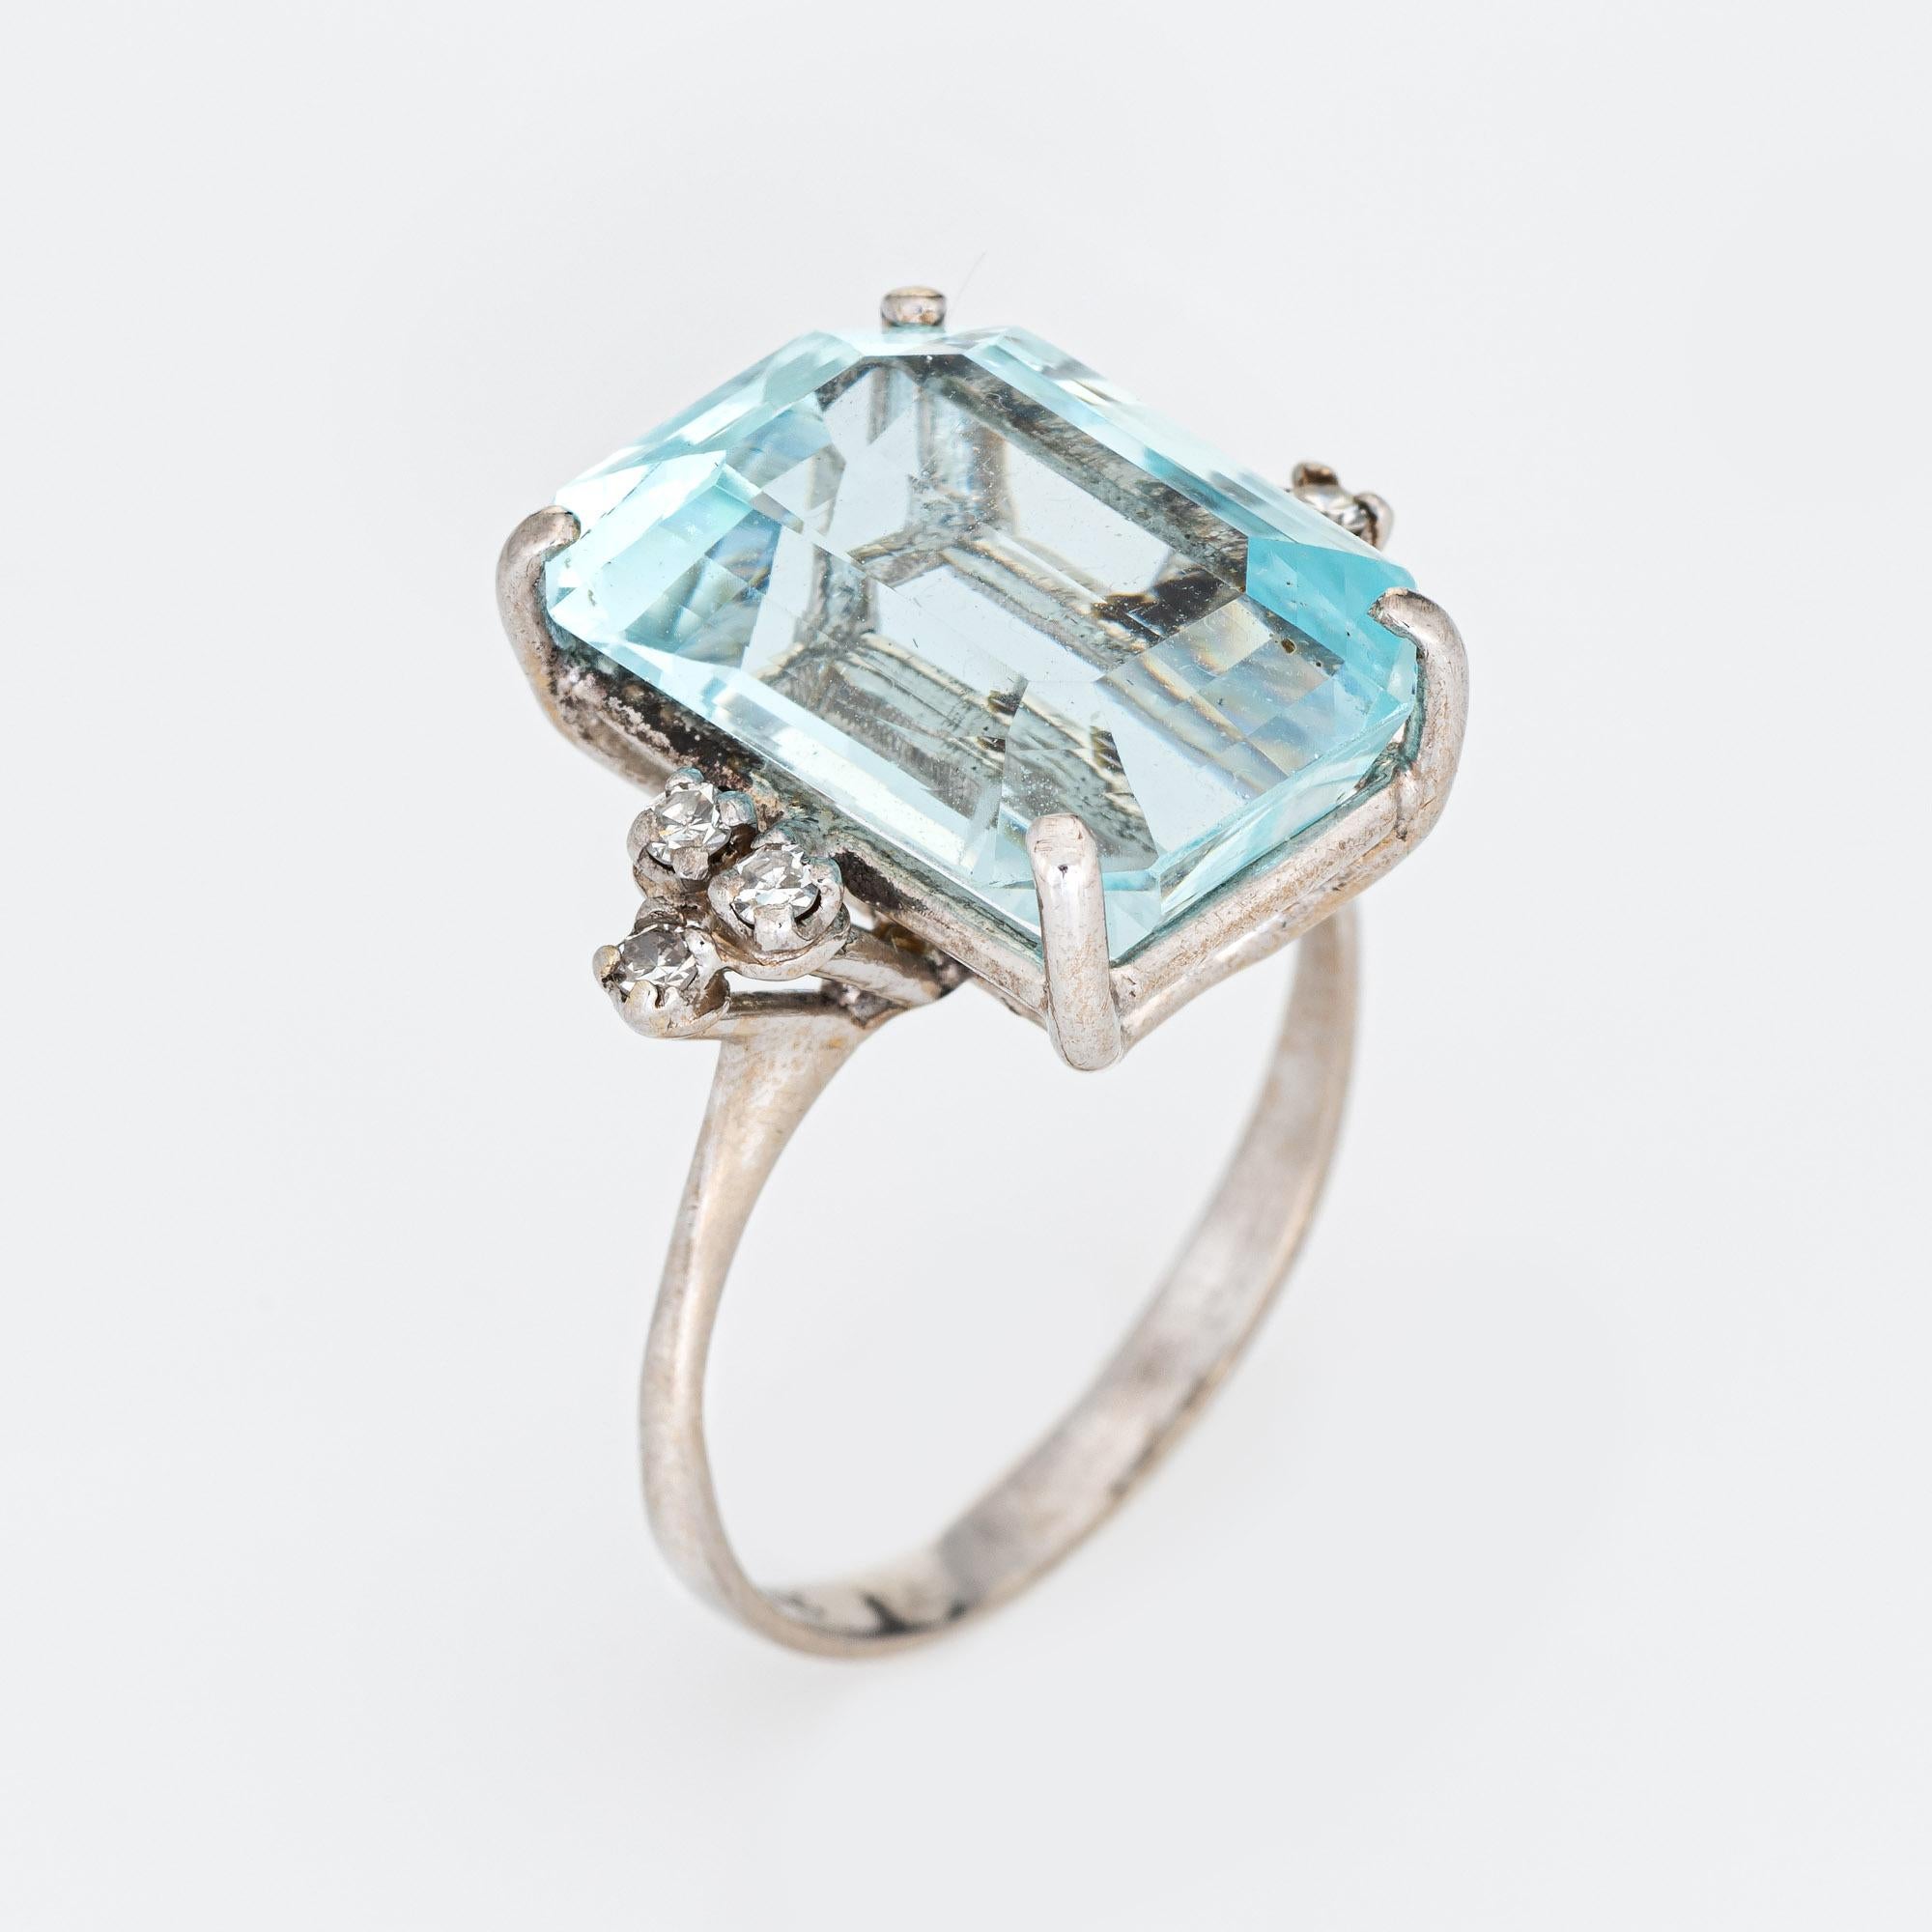 Stylish H Stern aquamarine & diamond ring (circa 1950s to 1960s), crafted in 18 karat white gold. 

Emerald cut aquamarine measures 16mm x 12mm (estimated at 13carats), accented with six estimated 0.02 carat single cut diamonds. The total diamond